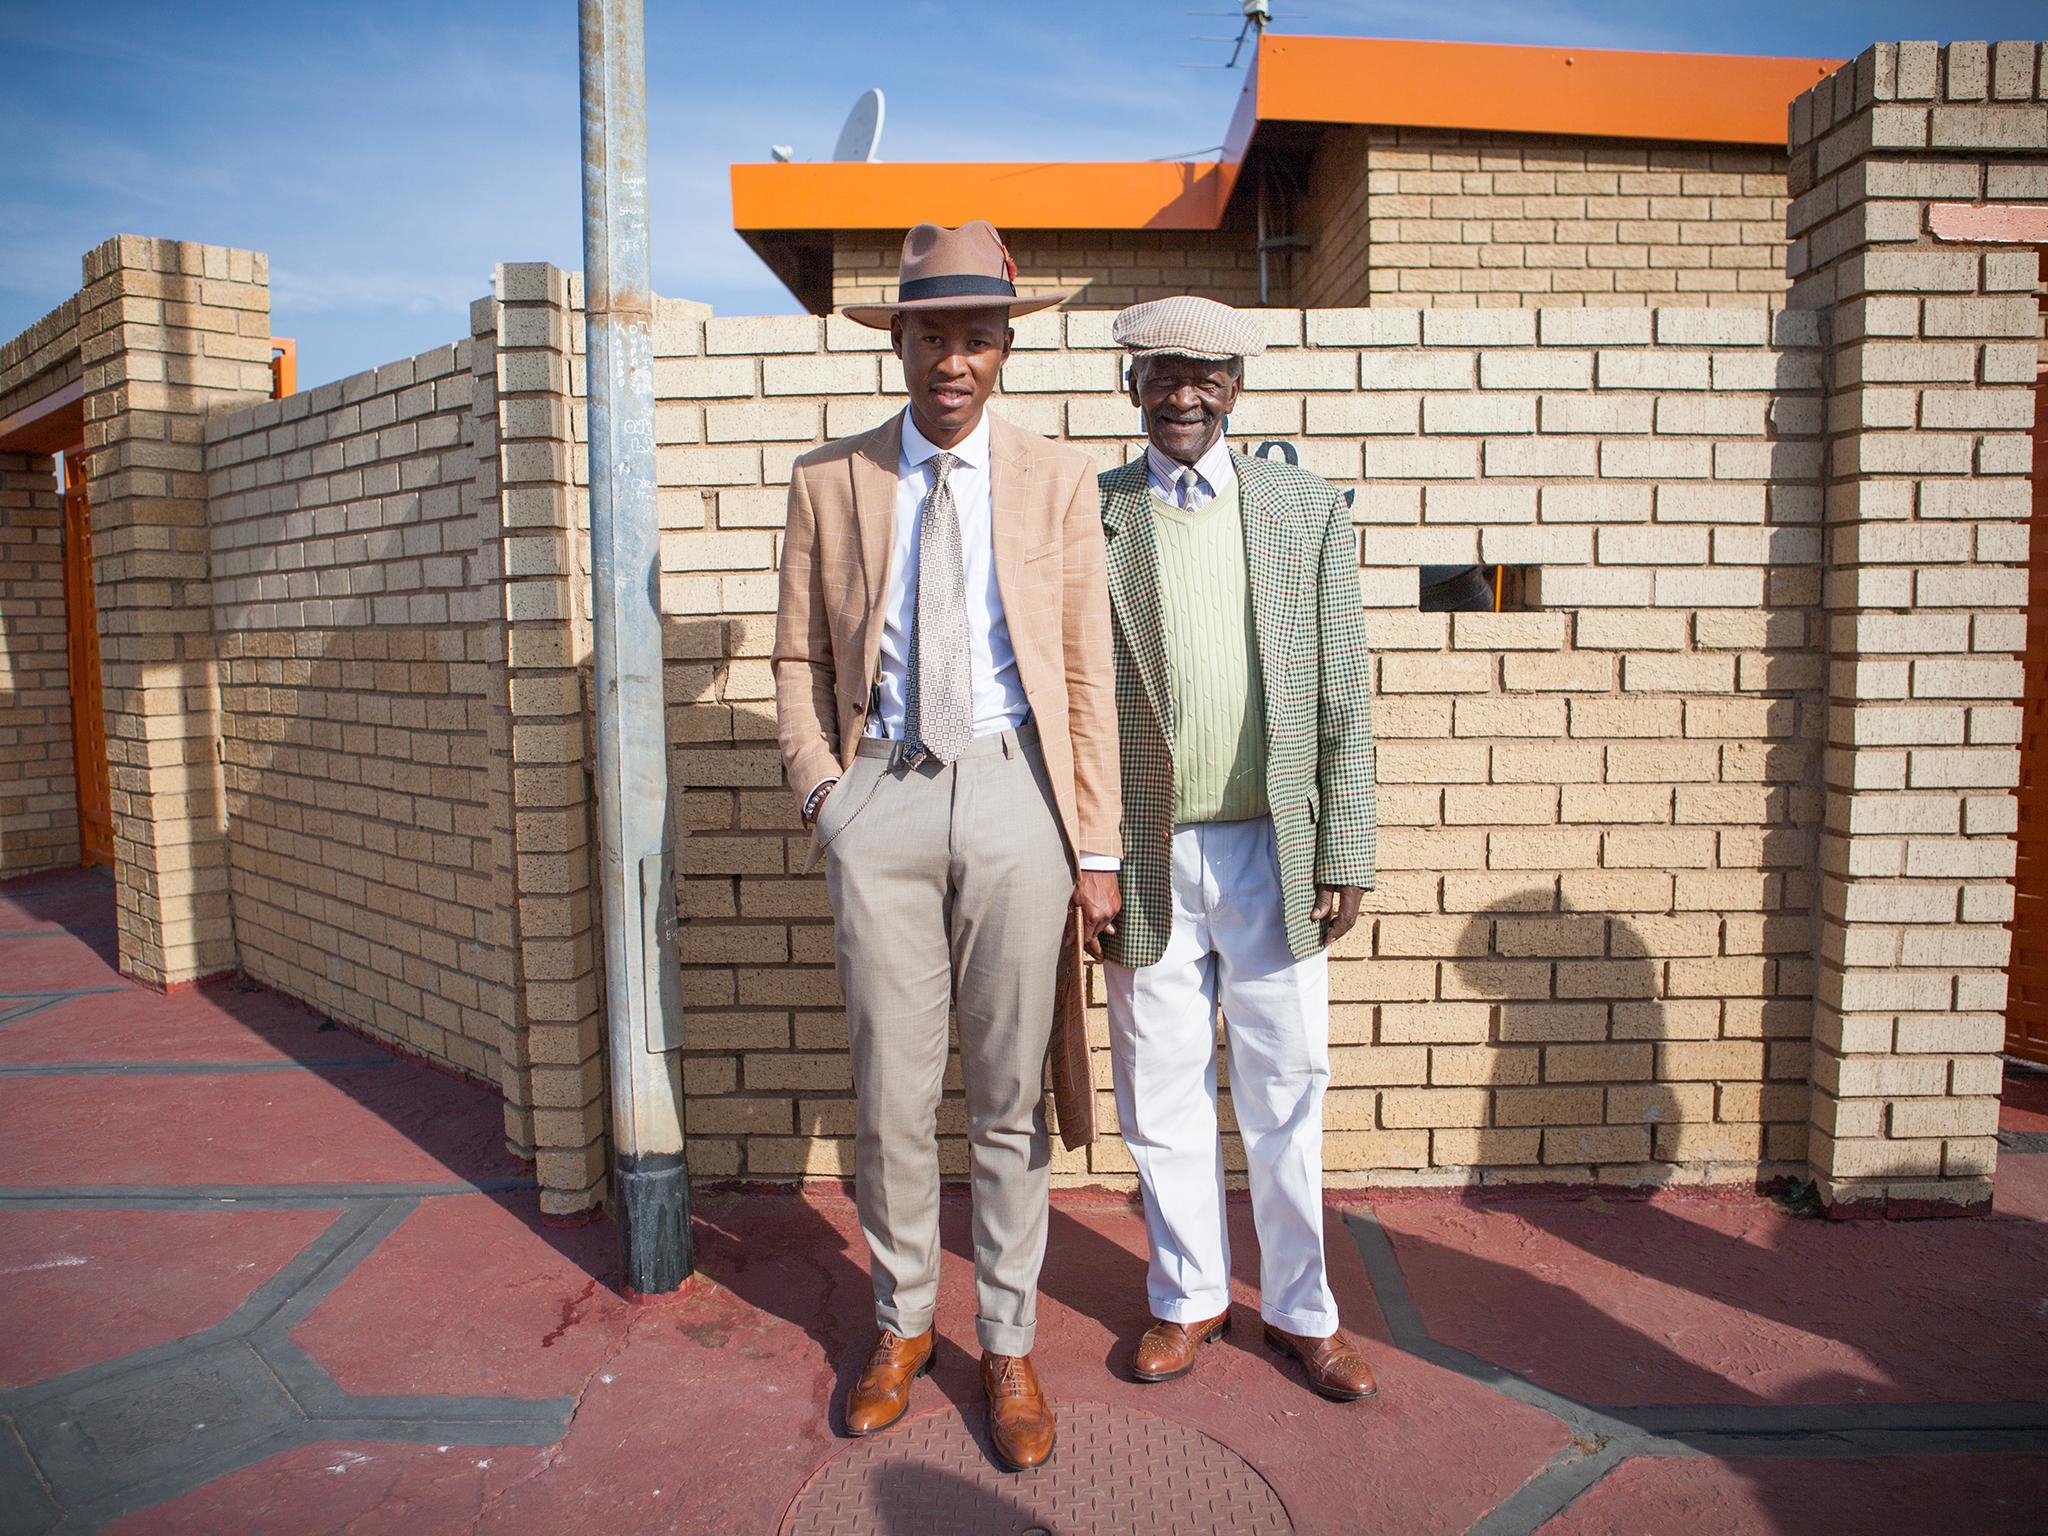 Brian Lehang, a South African dandy, poses in Johannesburg (pictured left) in a photo taken from the We Are Dandy book